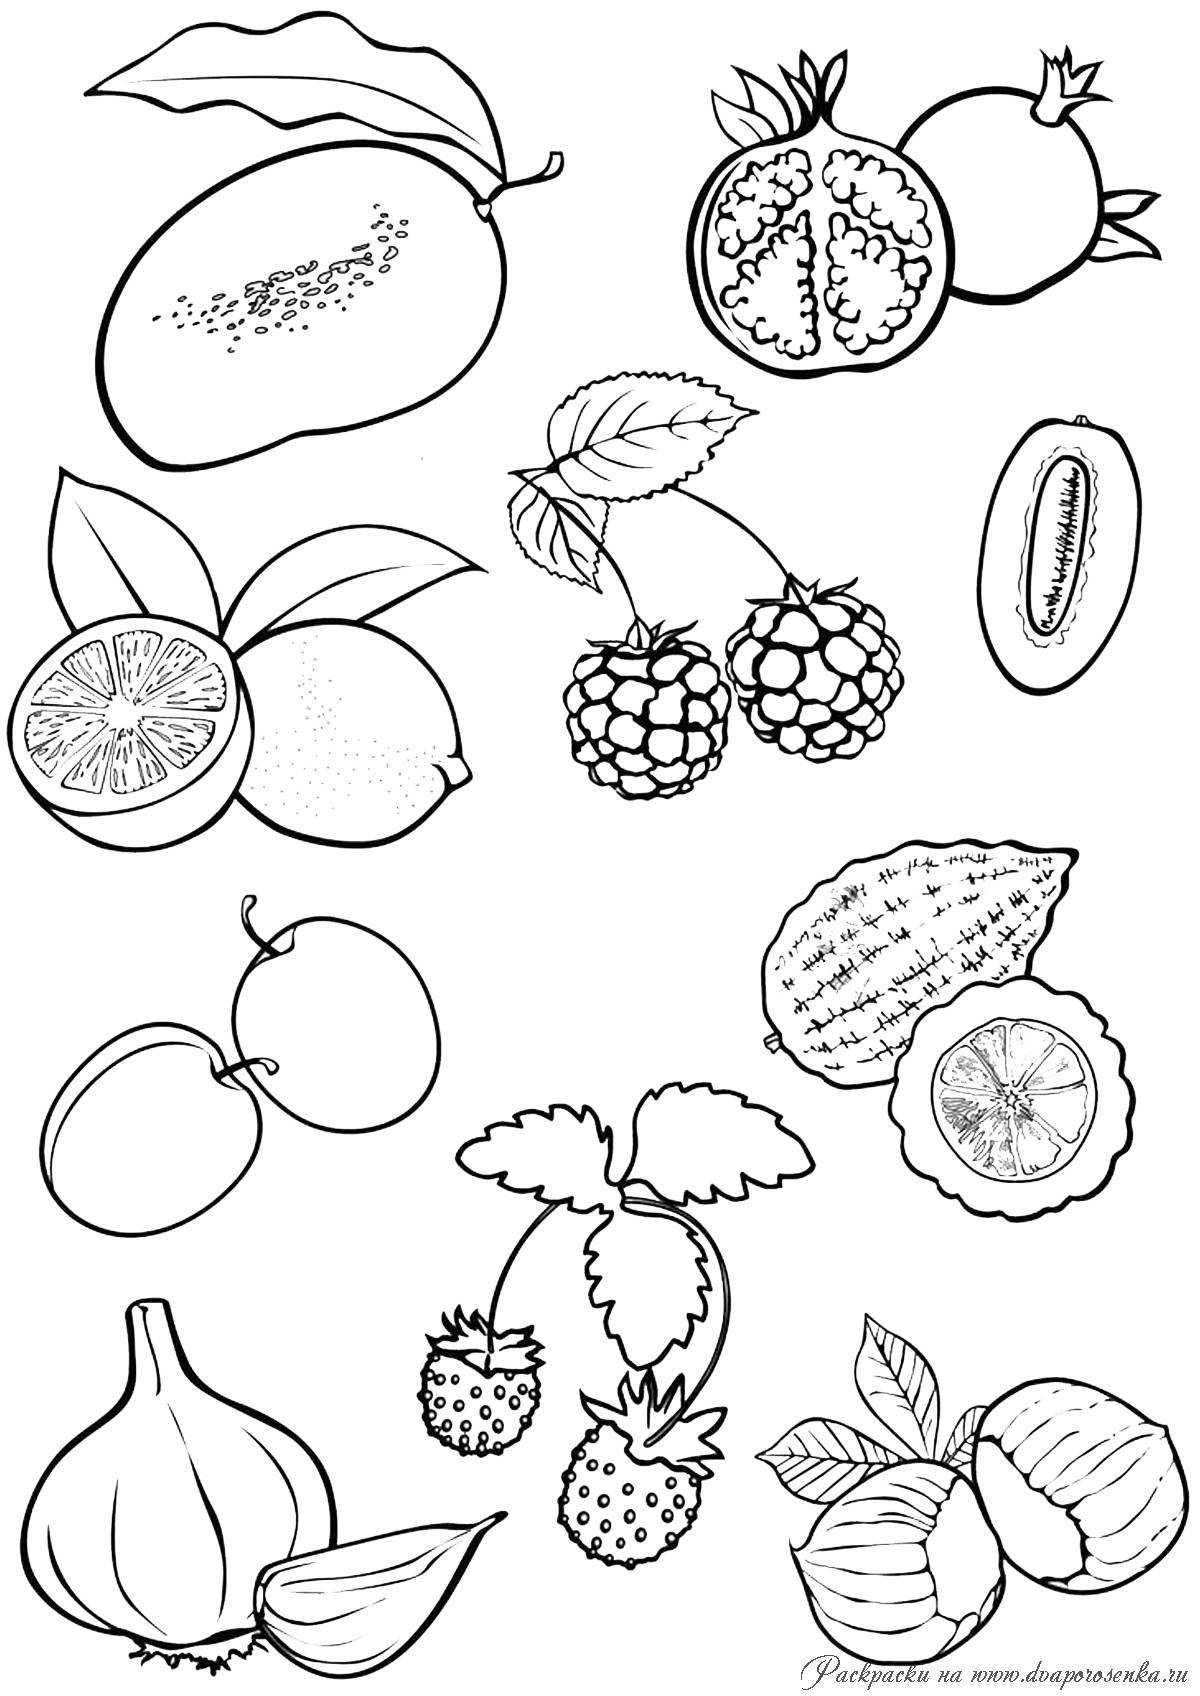 Exquisite fruit and vegetable coloring book for girls